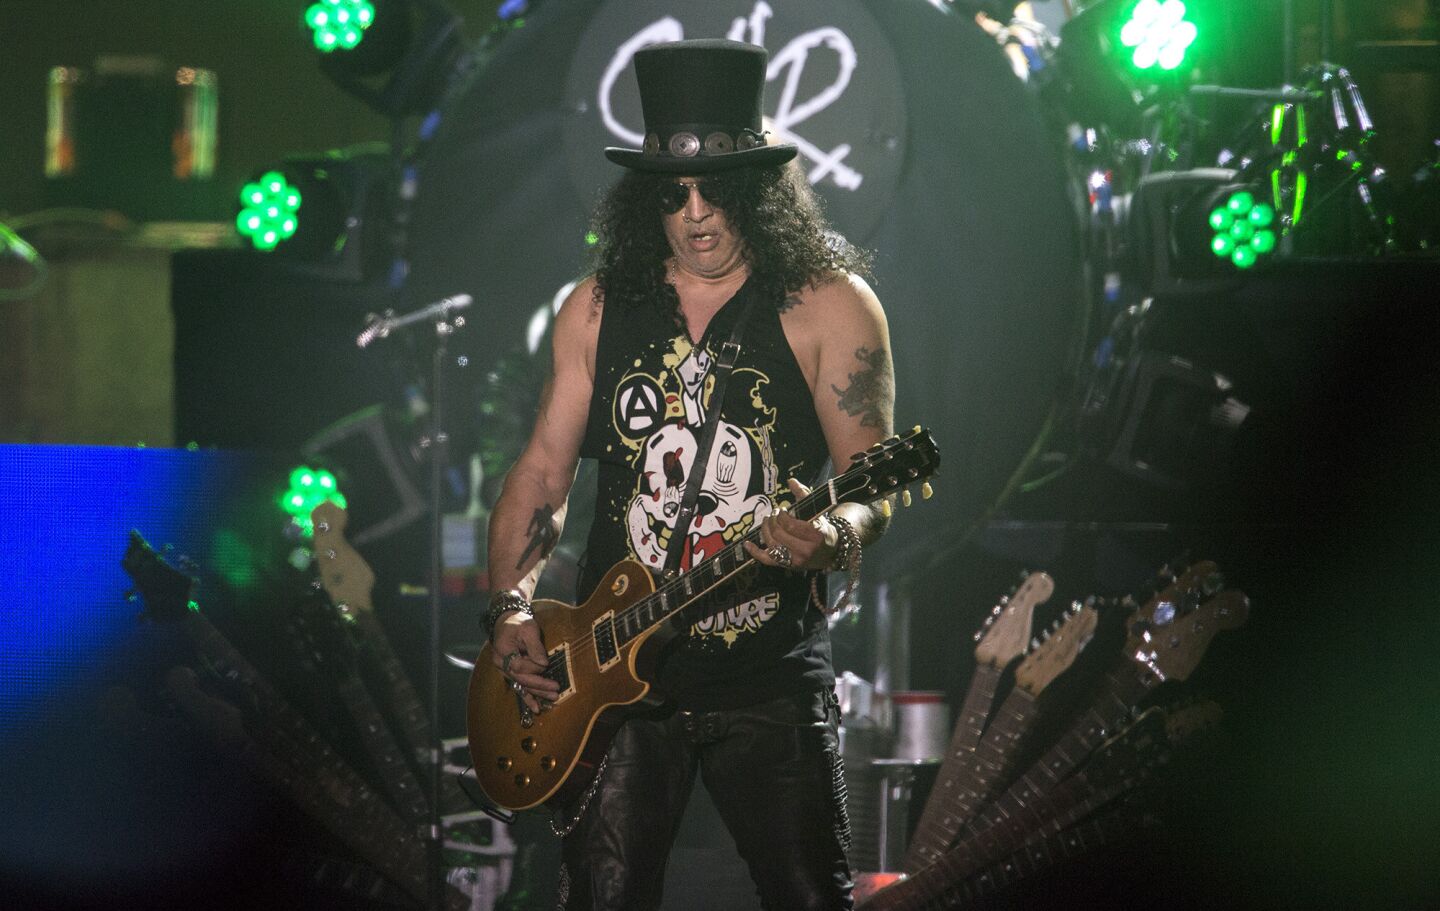 Guns N' Roses' Slash onstage at the Coachella Valley Music and Arts Festival.